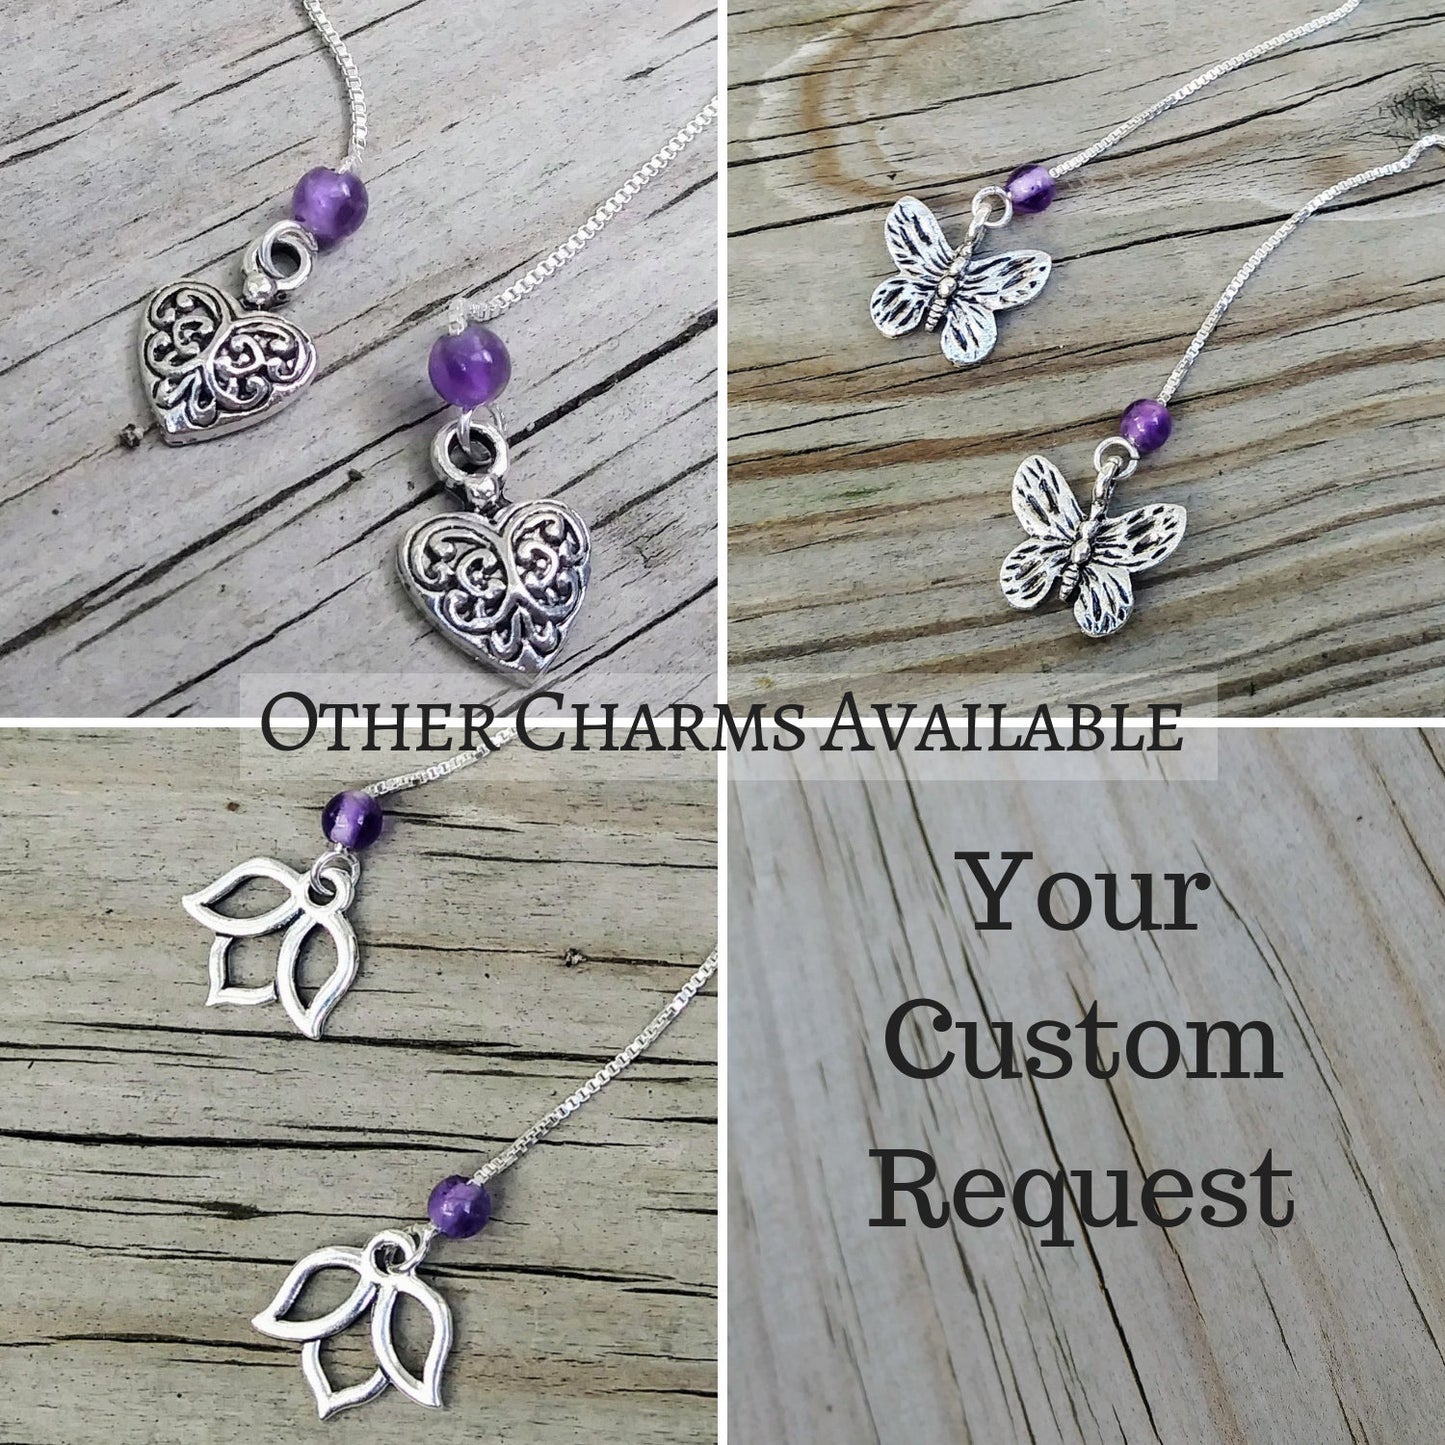 Butterfly Charm Threader Earrings with Chakra Gemstone Set - 4 inch 0.925 Sterling Silver Threads